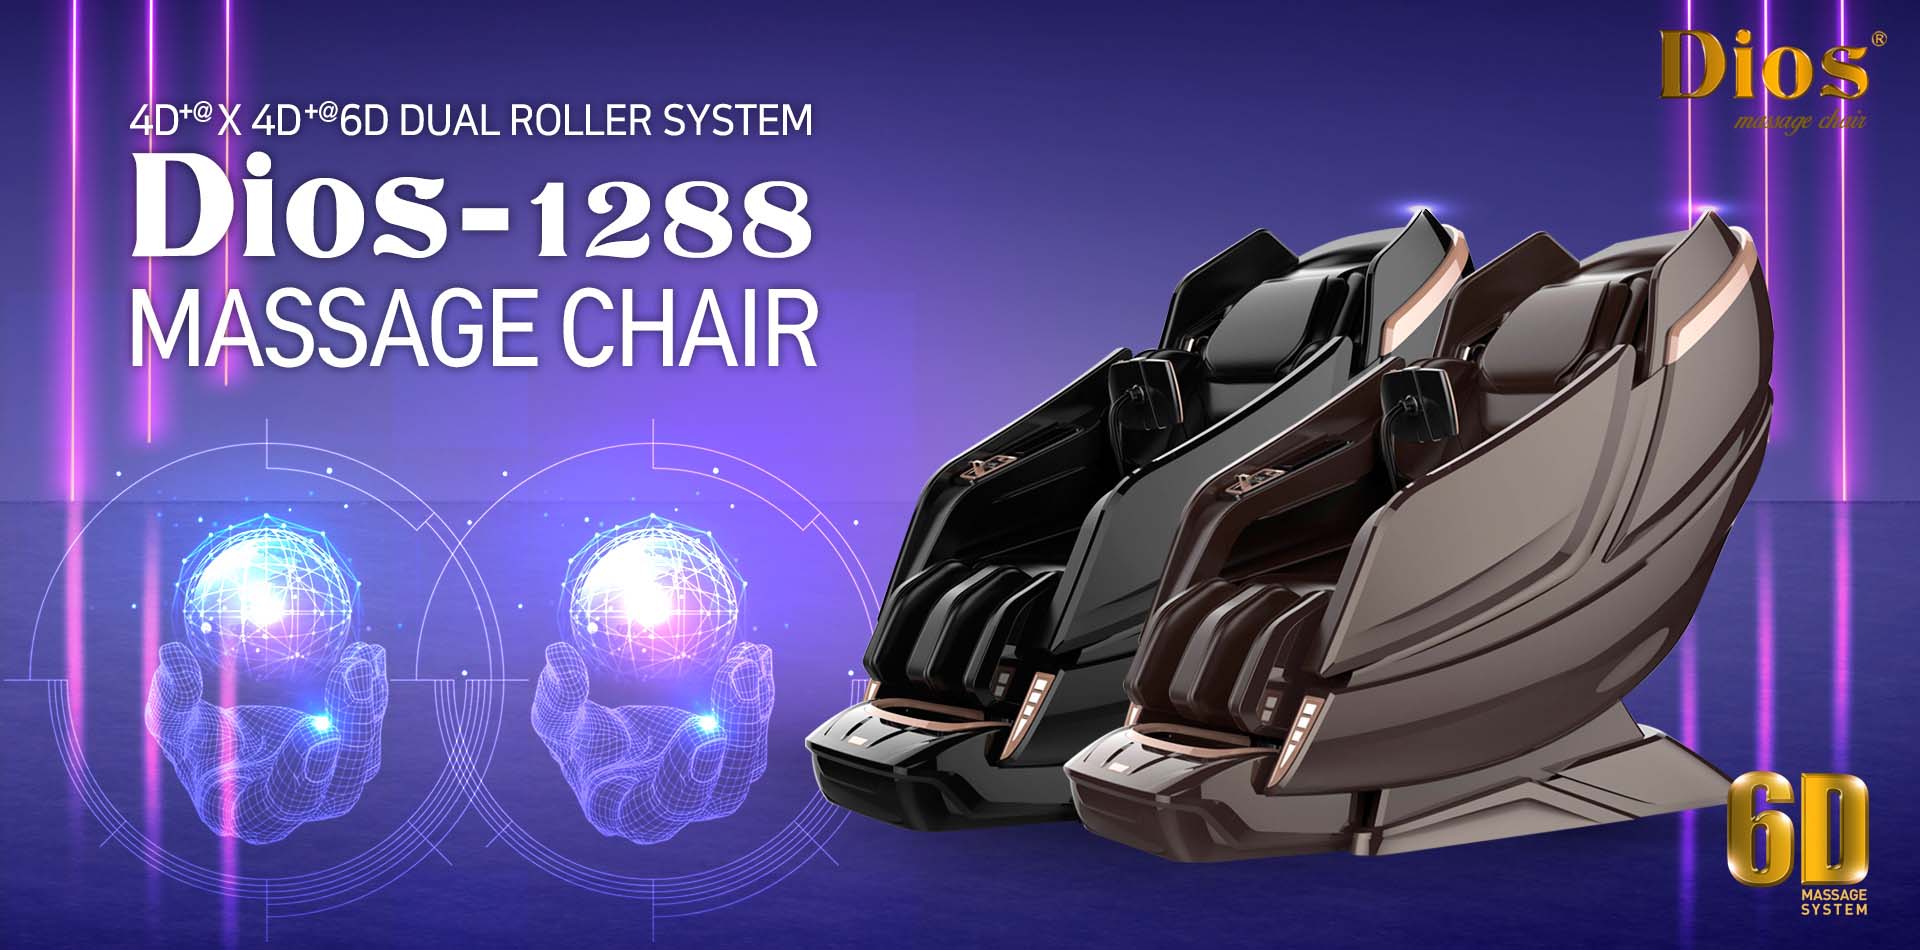 Dios Dual Roller Massage Chair